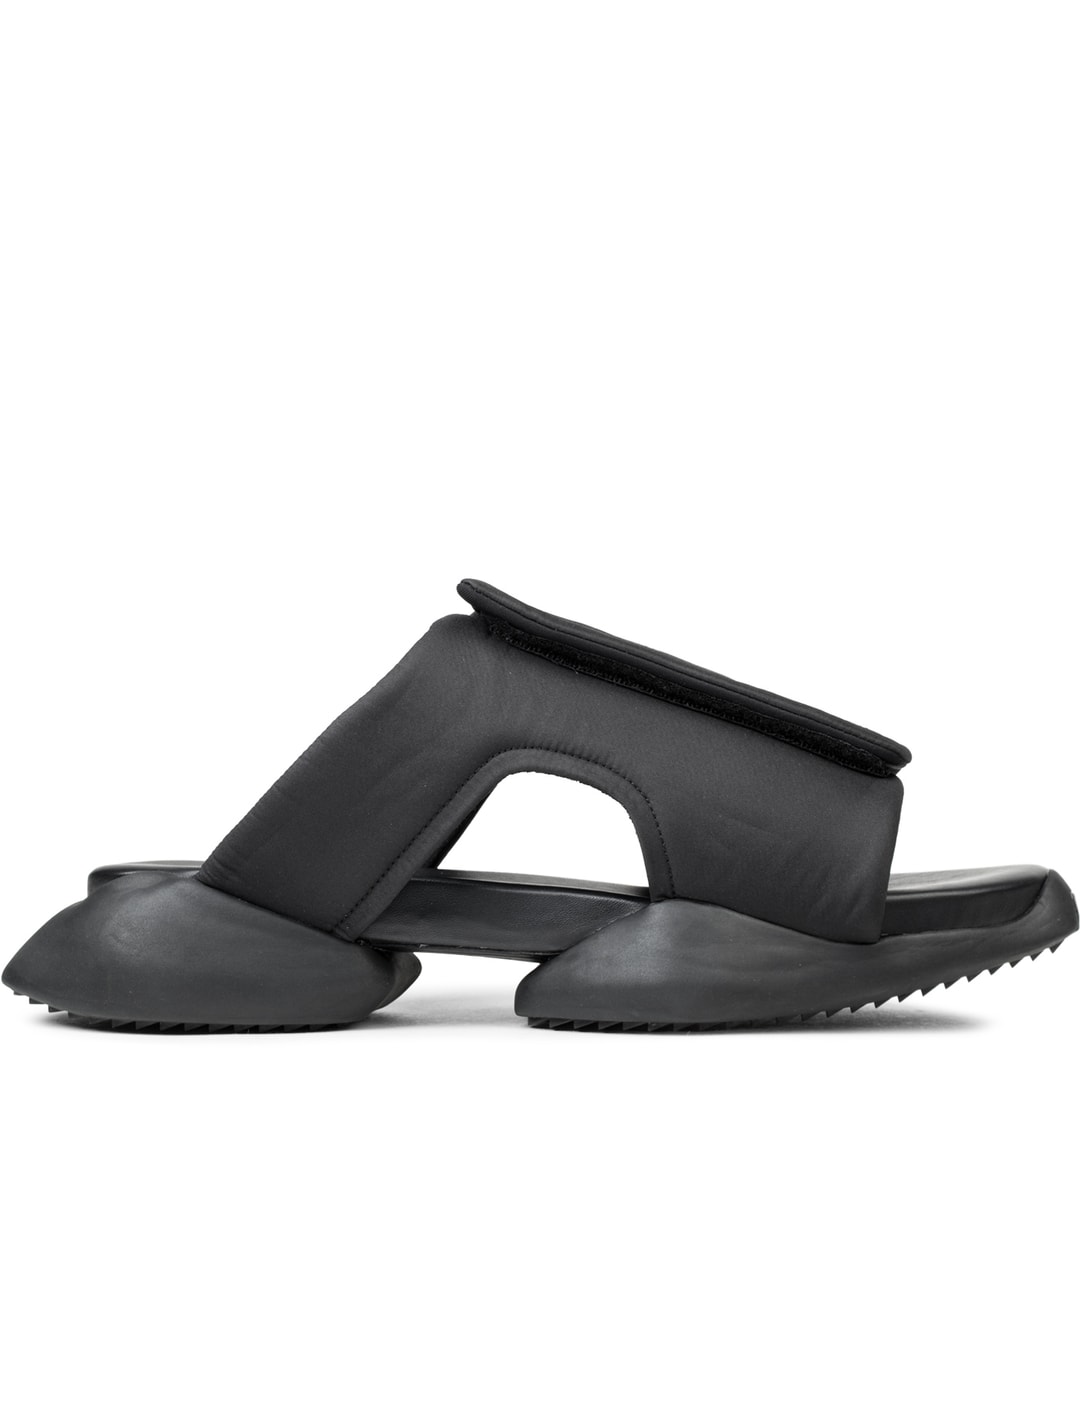 Owens Drkshdw - Adidas Rick Owens Clog Sandals | HBX Globally Curated Fashion and Lifestyle Hypebeast